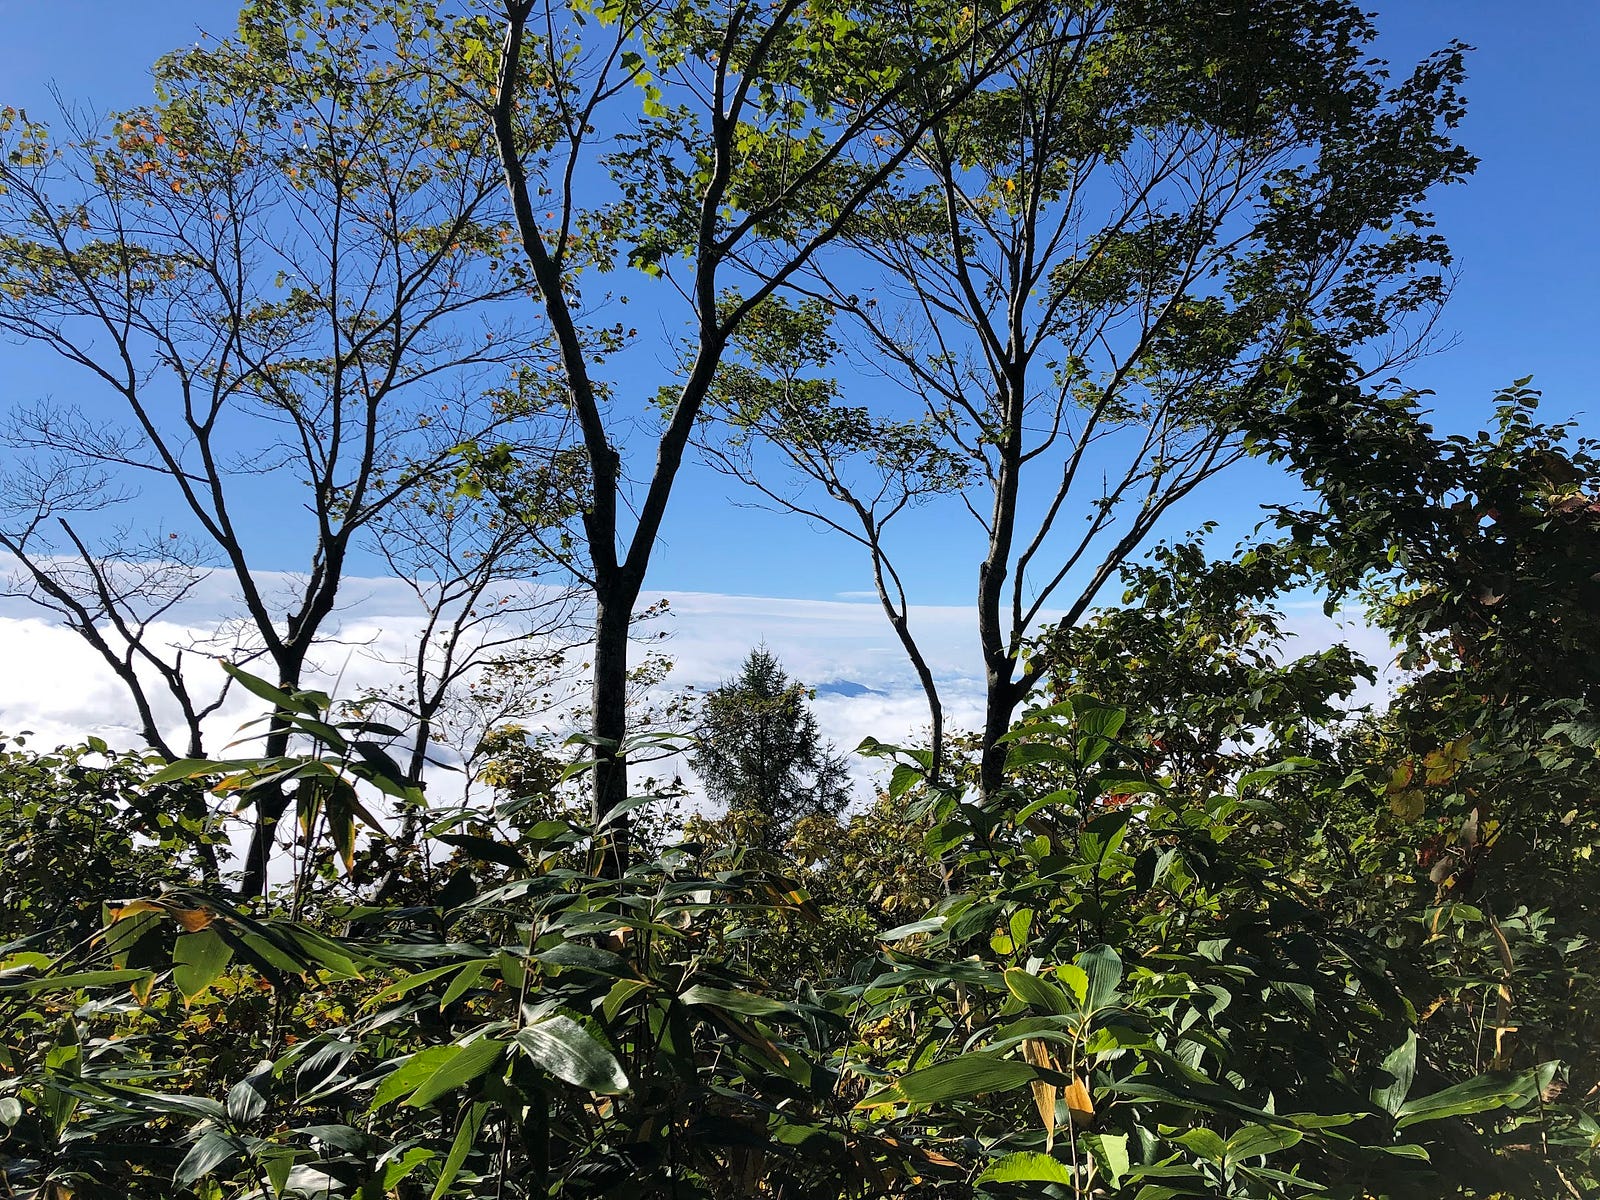 Mountains visible amongst the sea of clouds seen through the bush from Murayama Ha-yama